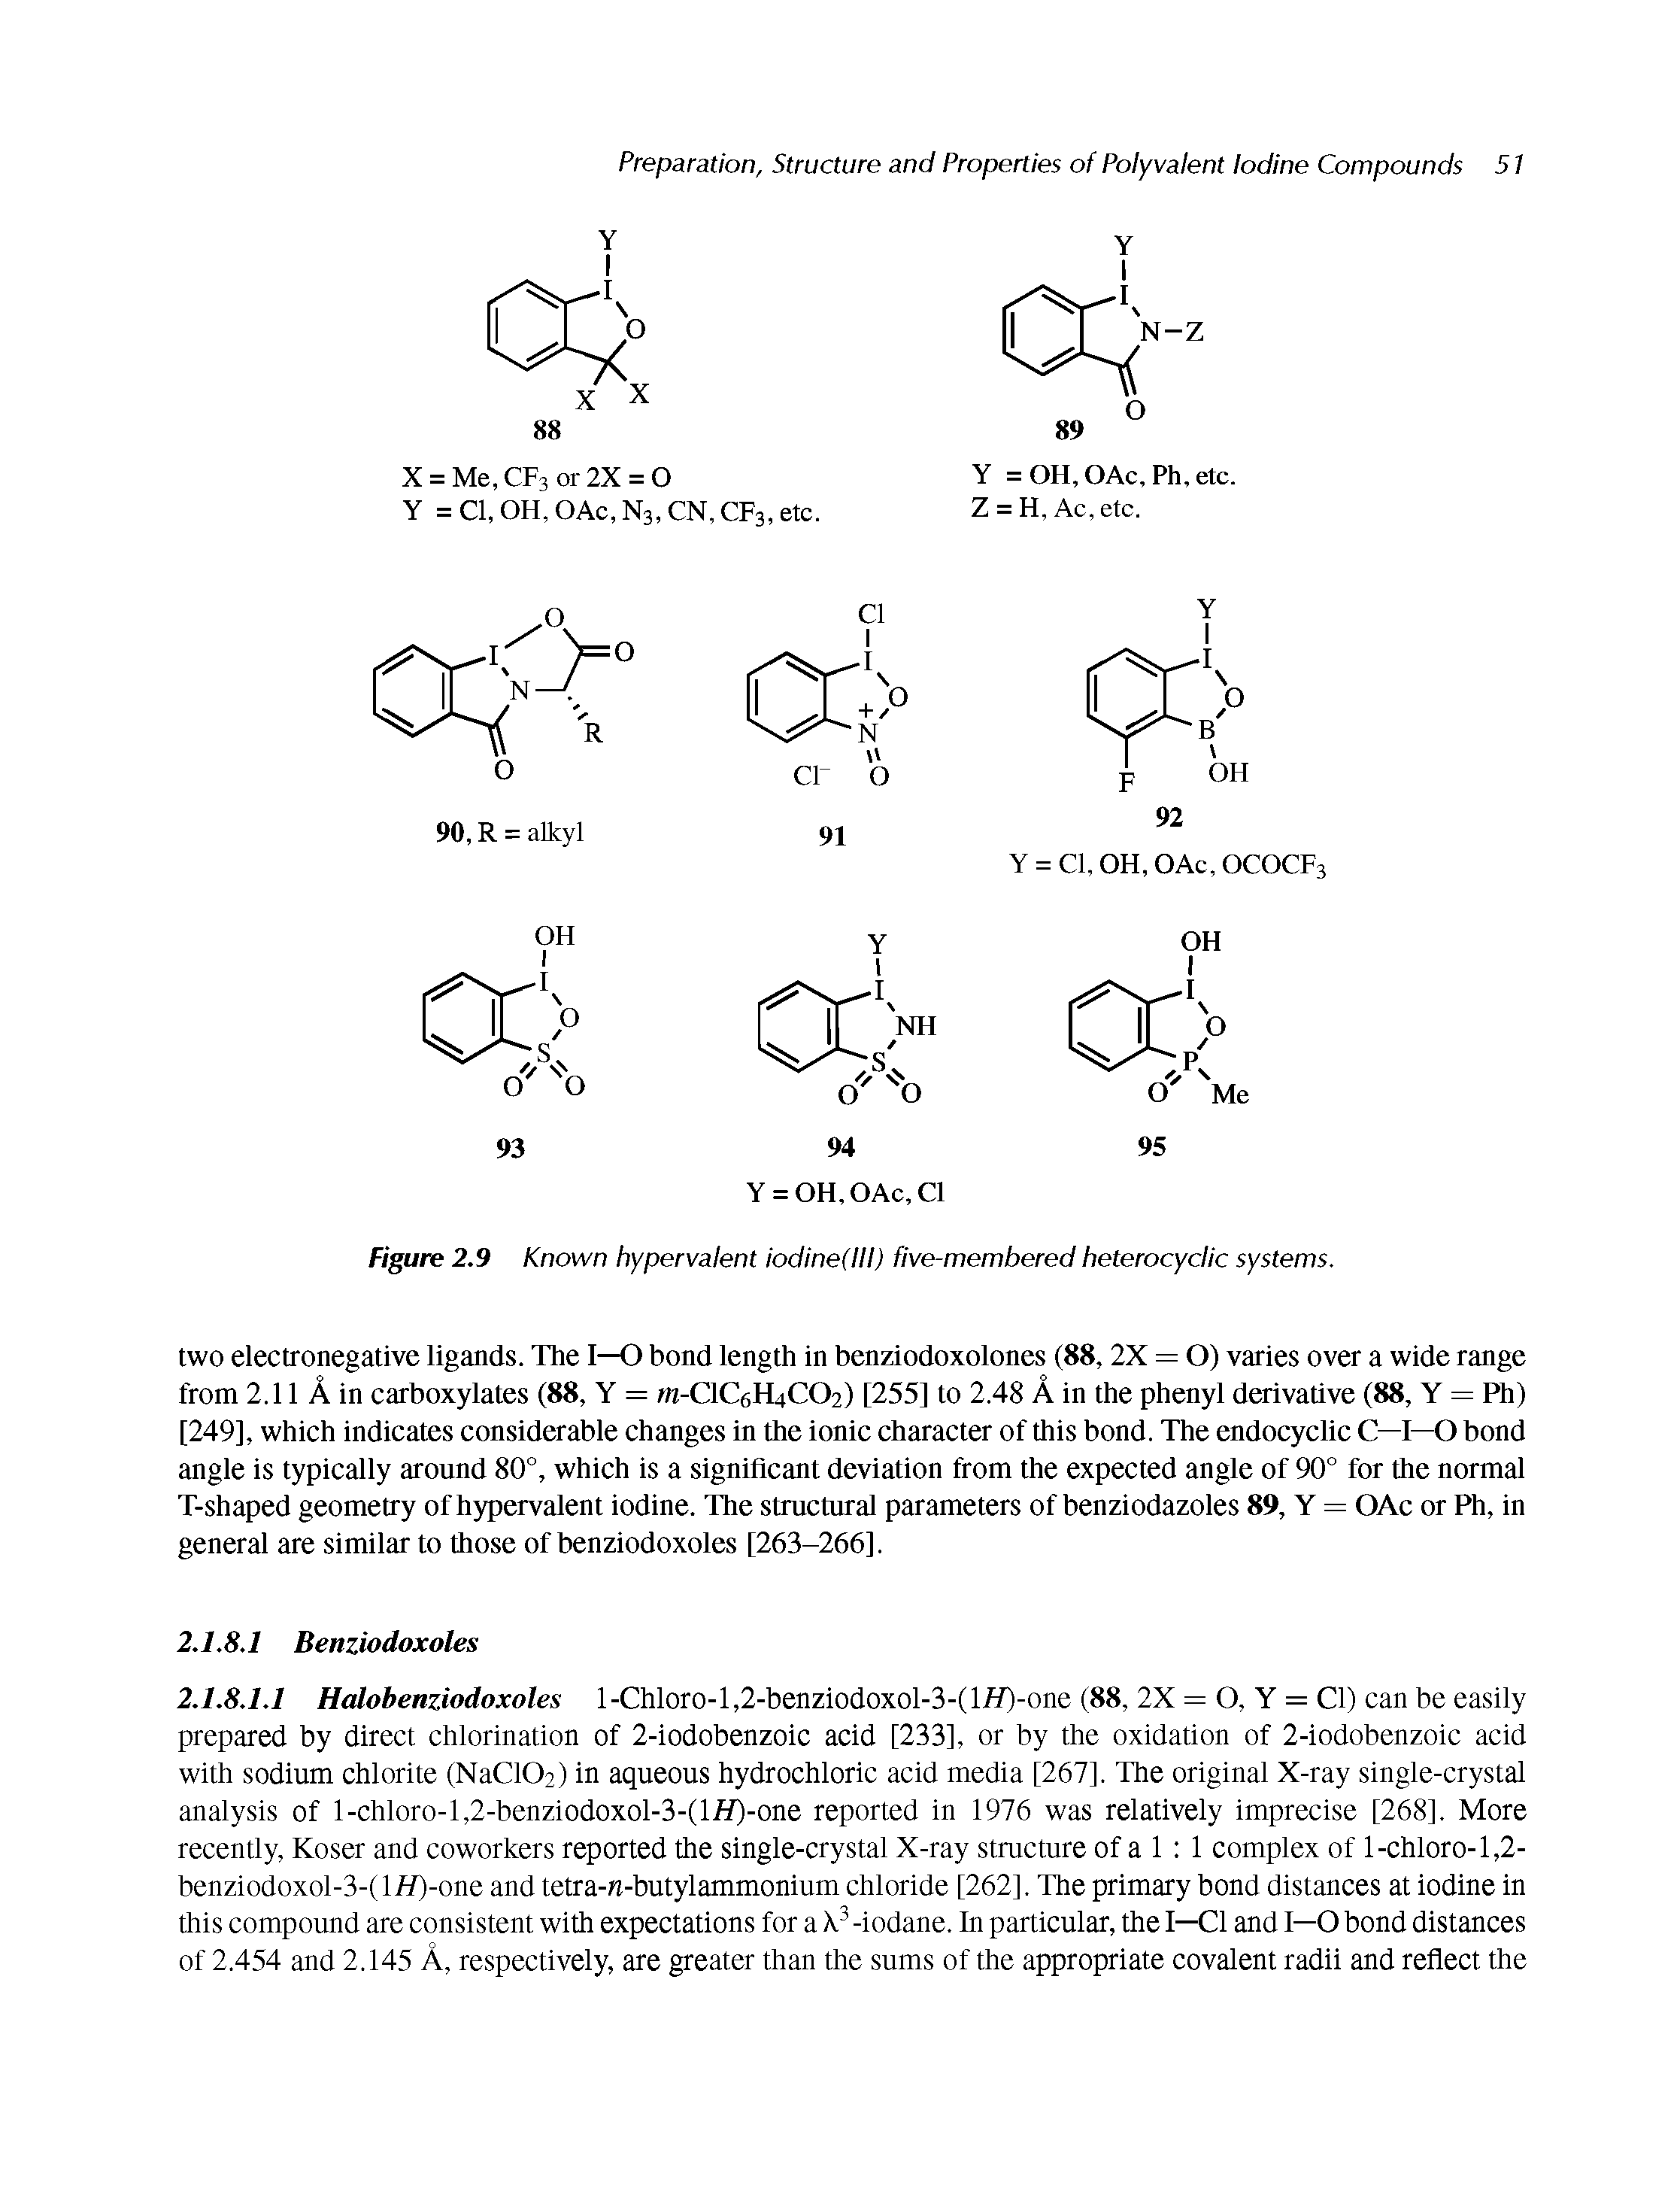 Figure 2.9 Known hypervalent iodine(lll) five-membered heterocyclic systems.